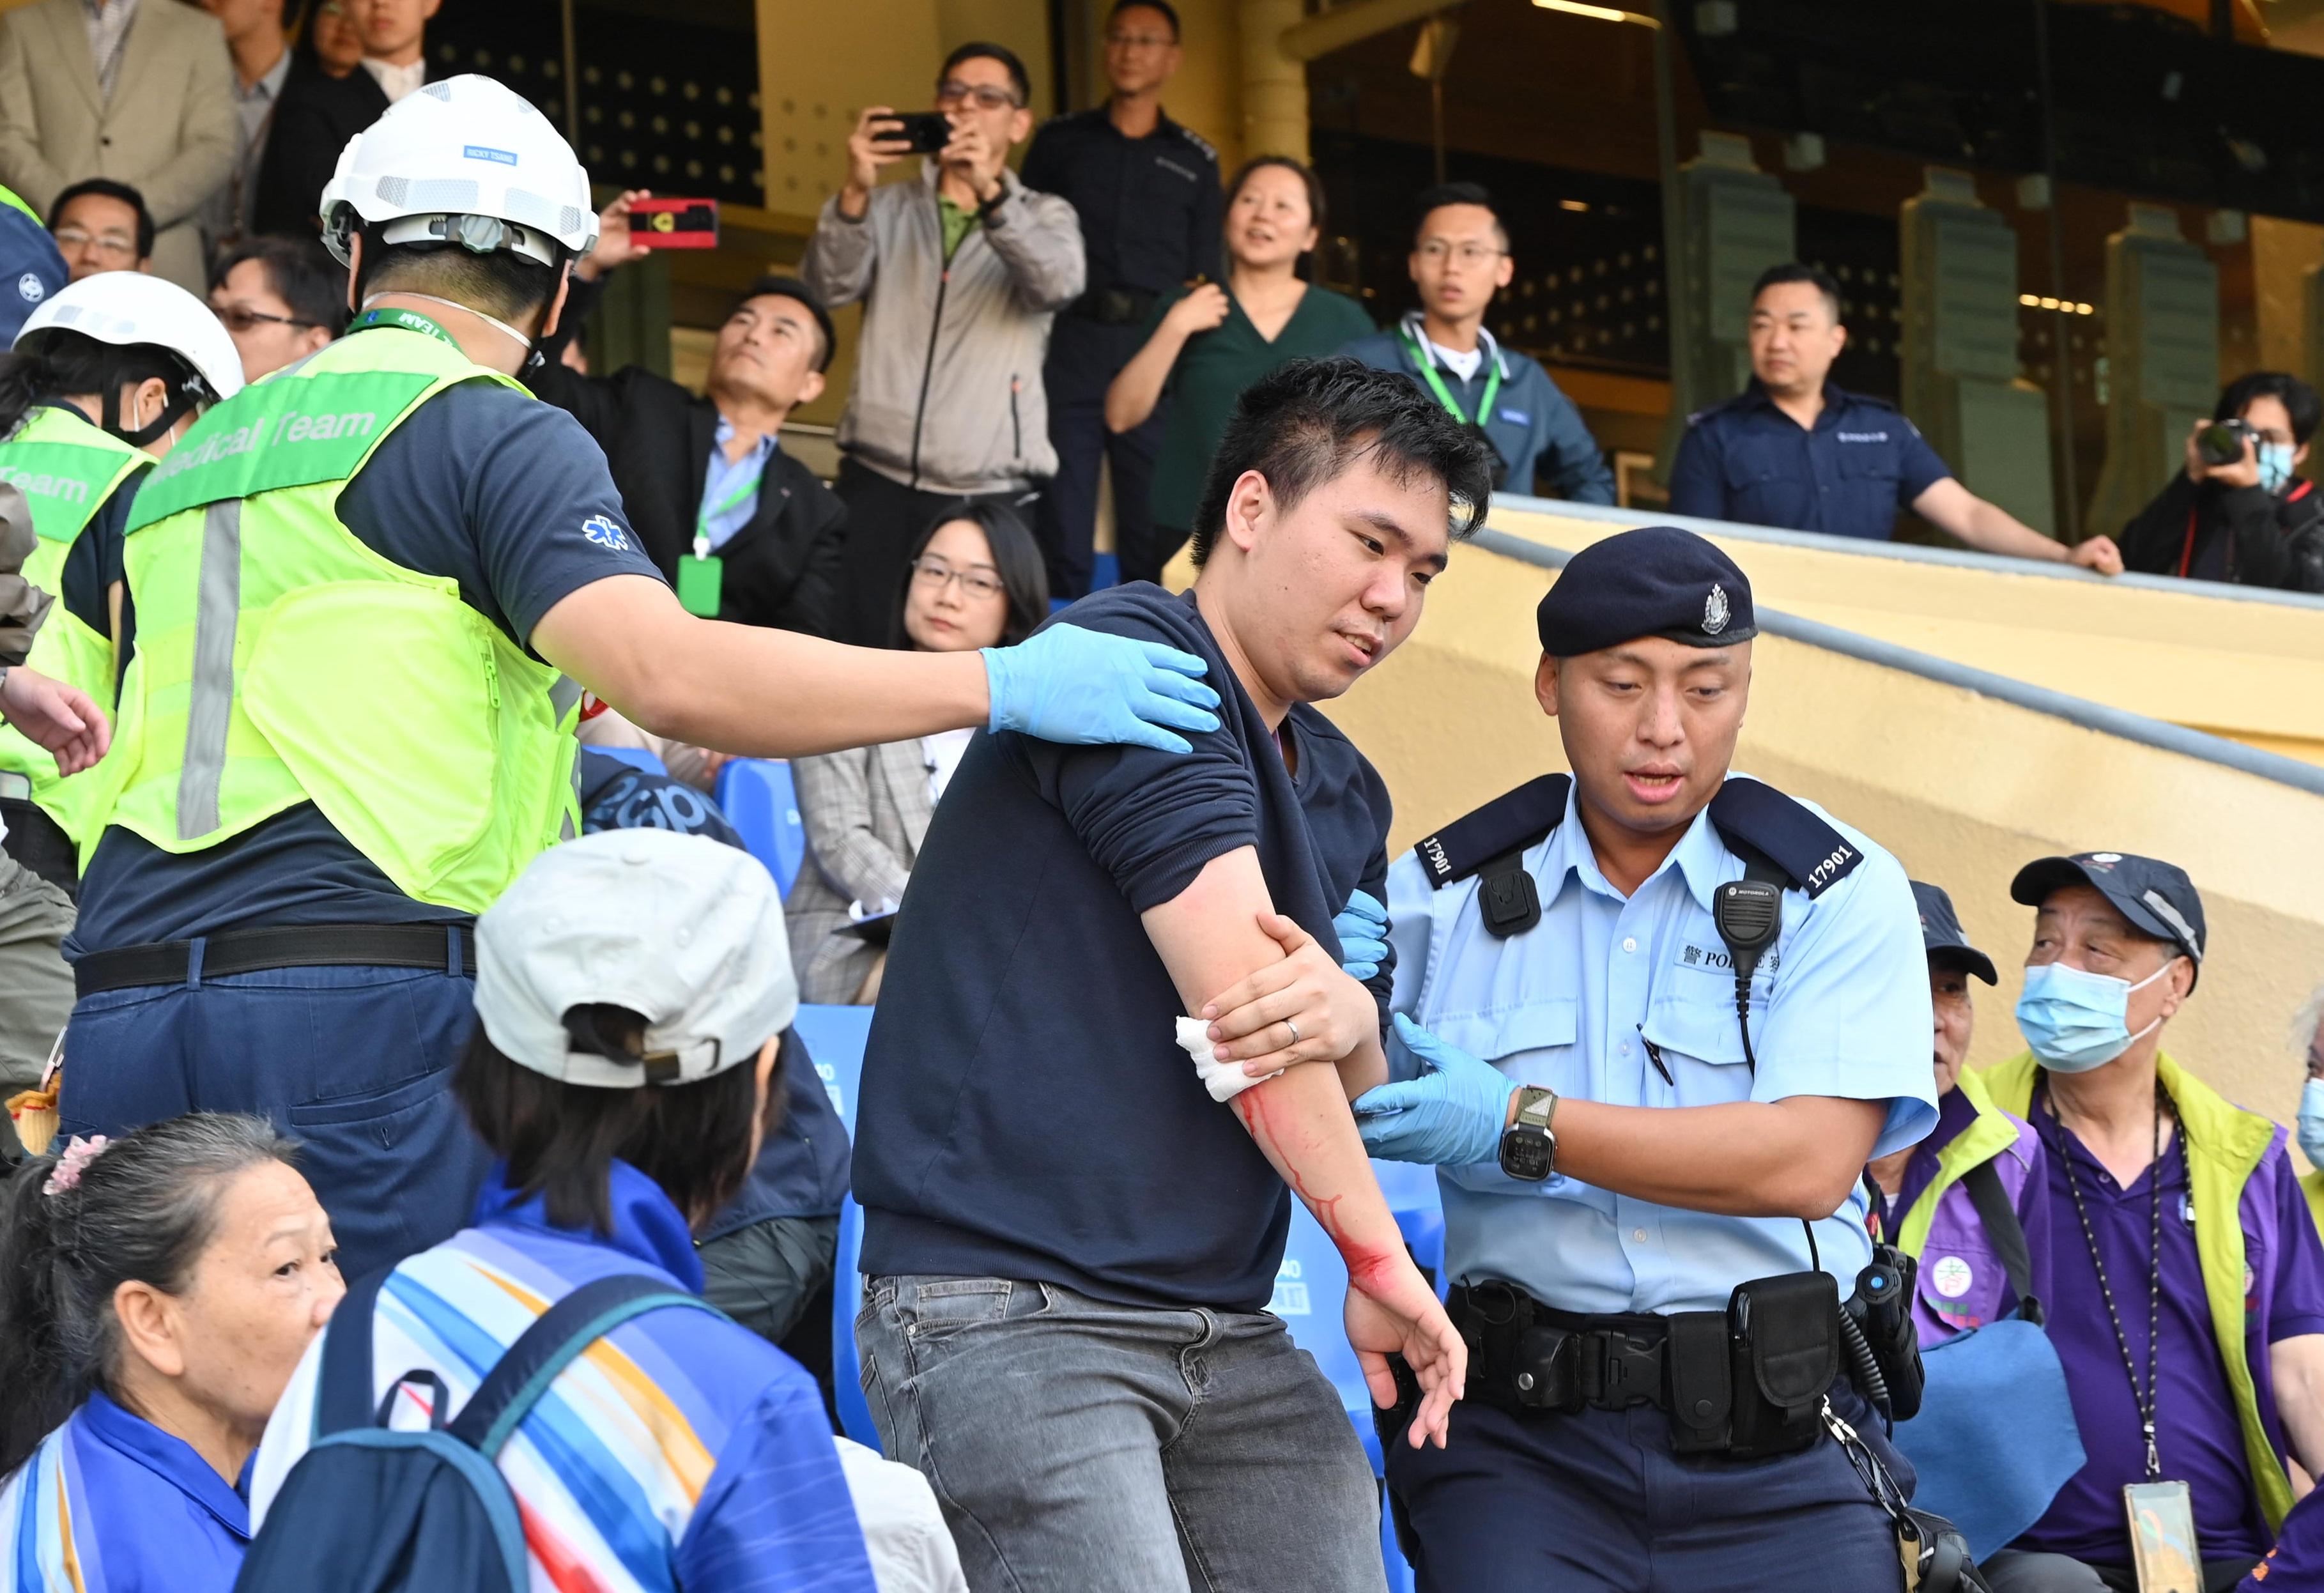 Police Hong Kong Island Regional Headquarters conducted an inter-departmental major incident exercise codenamed "BROKENPIN" with the Fire Services Department, Hospital Authority, Hong Kong Jockey Club, St. John Ambulance Brigade and Hong Kong Association for Conflict and Catastrophe Medicine at Happy Valley Racecourse this afternoon (November 23). Picture shows officers rendering emergency care to the injured.